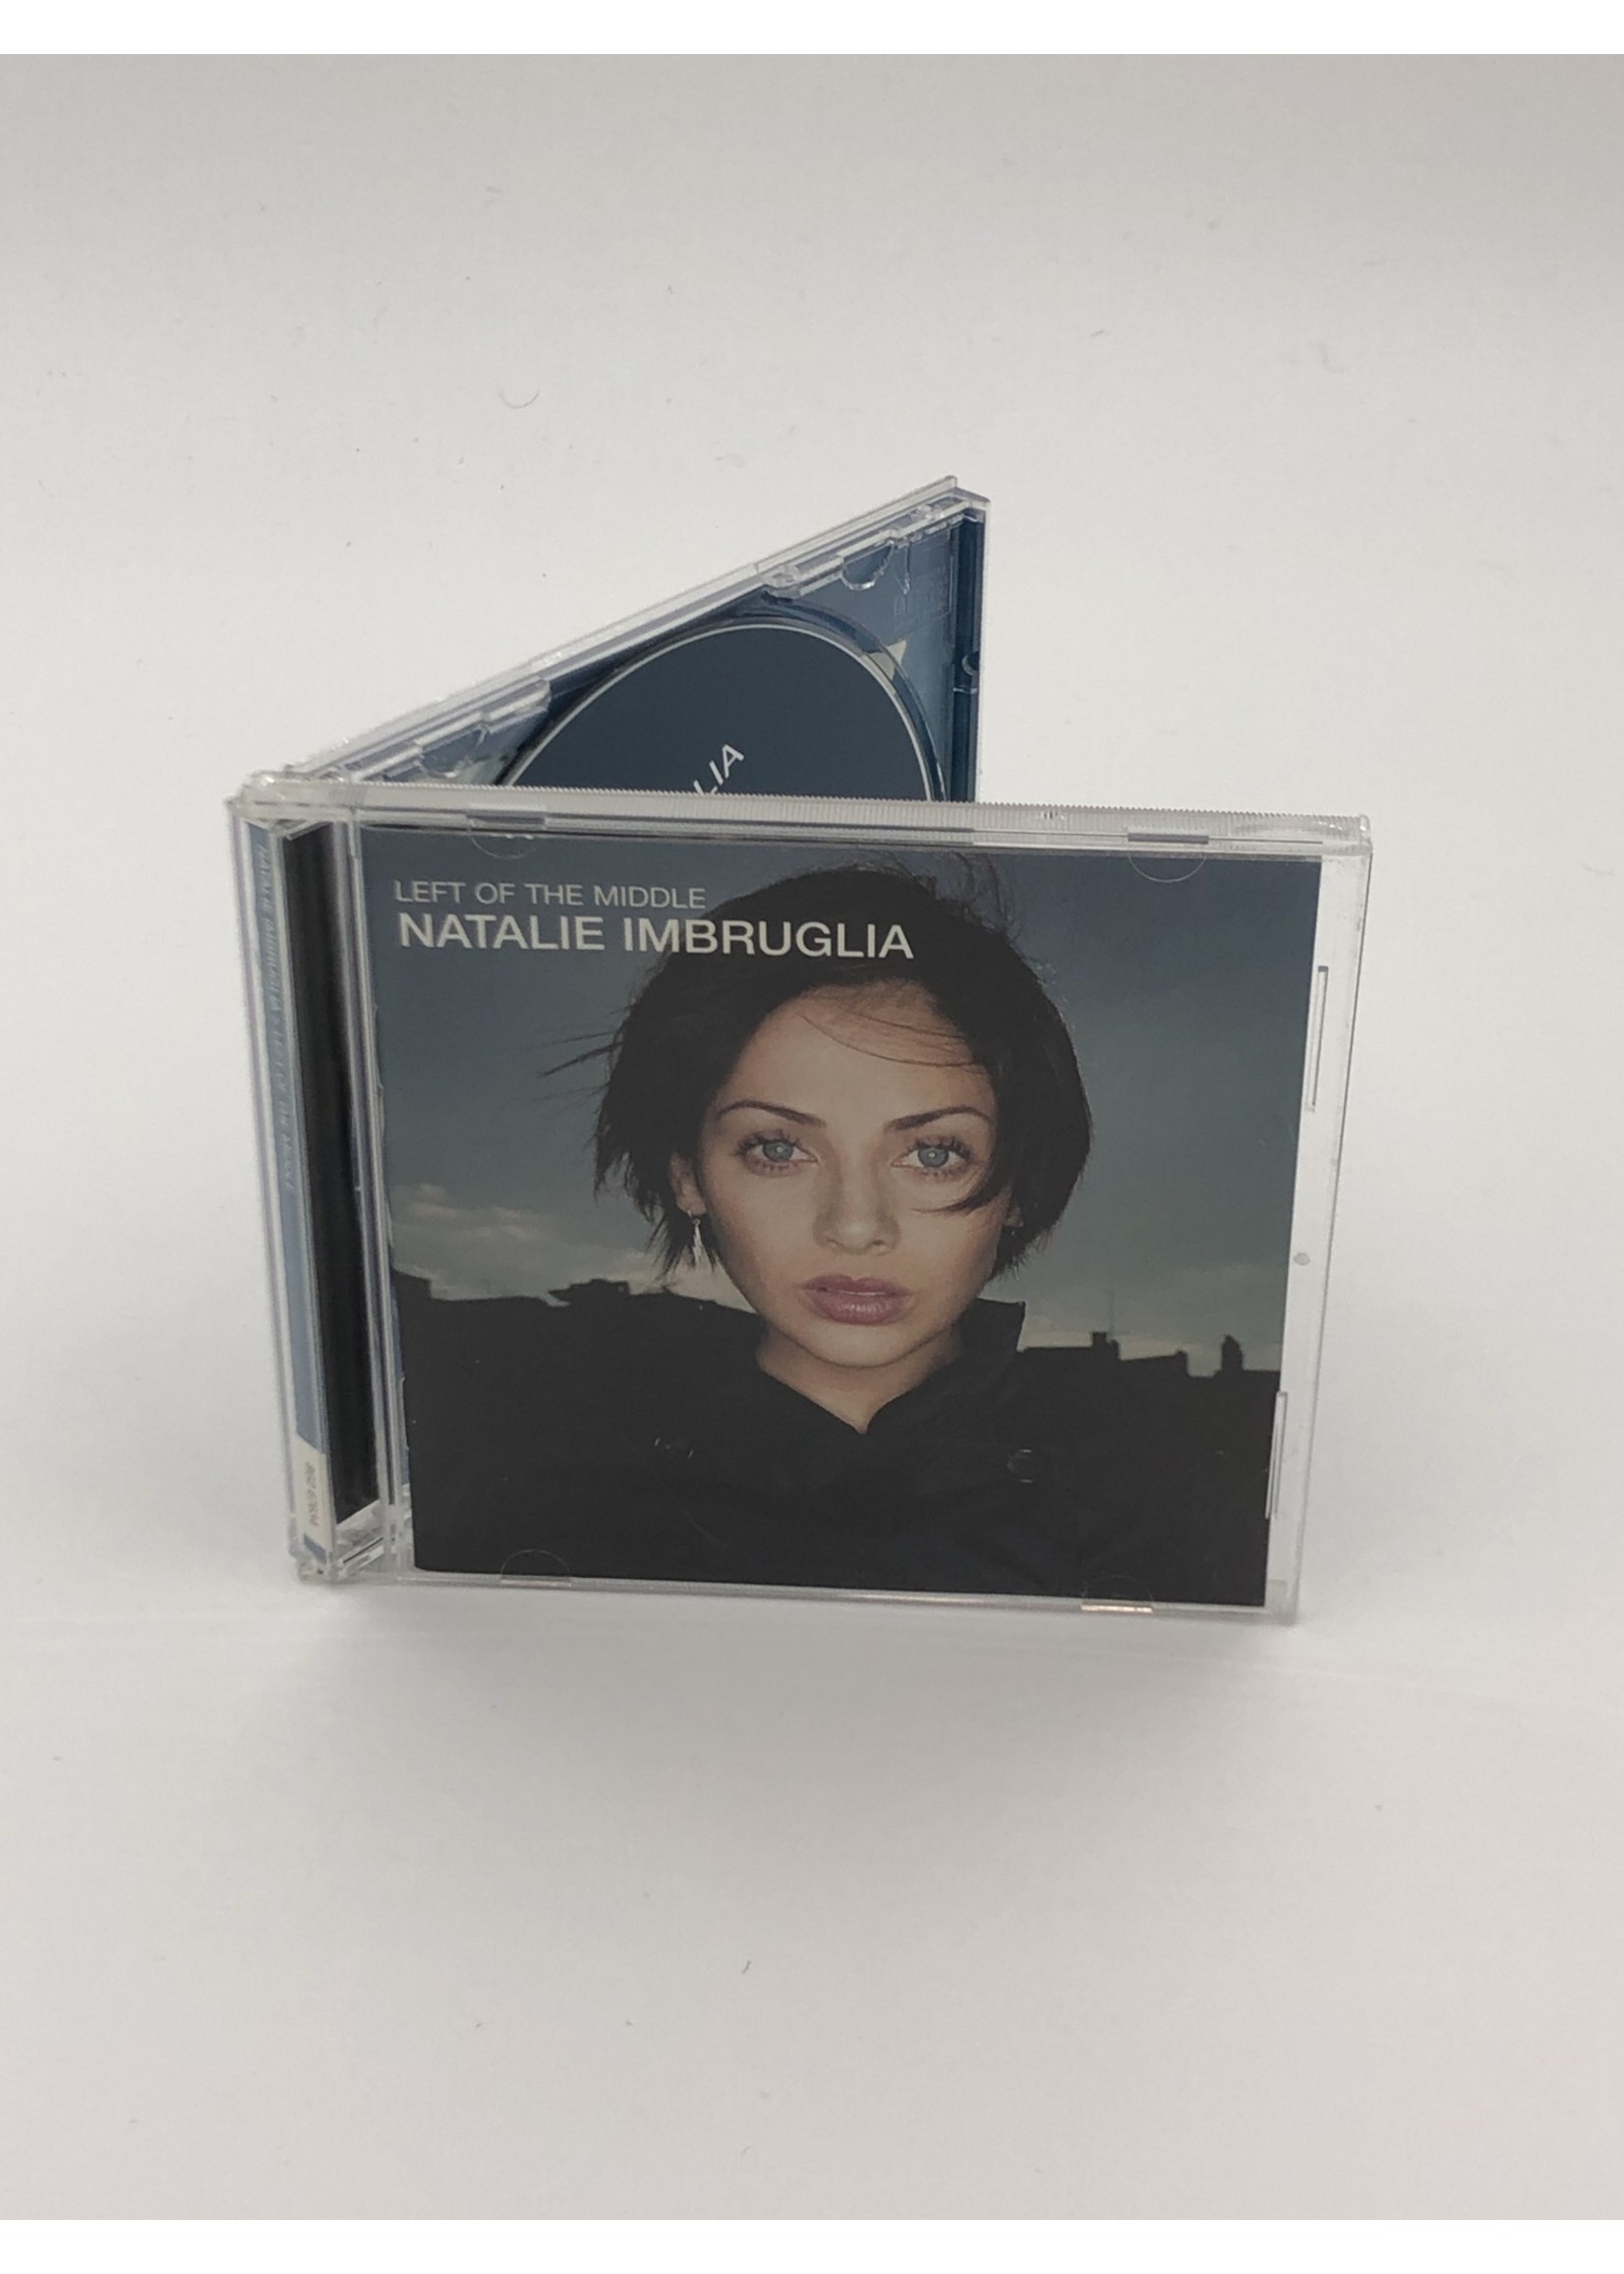 CD Natalie Imbruglia: Left of the Middle CD